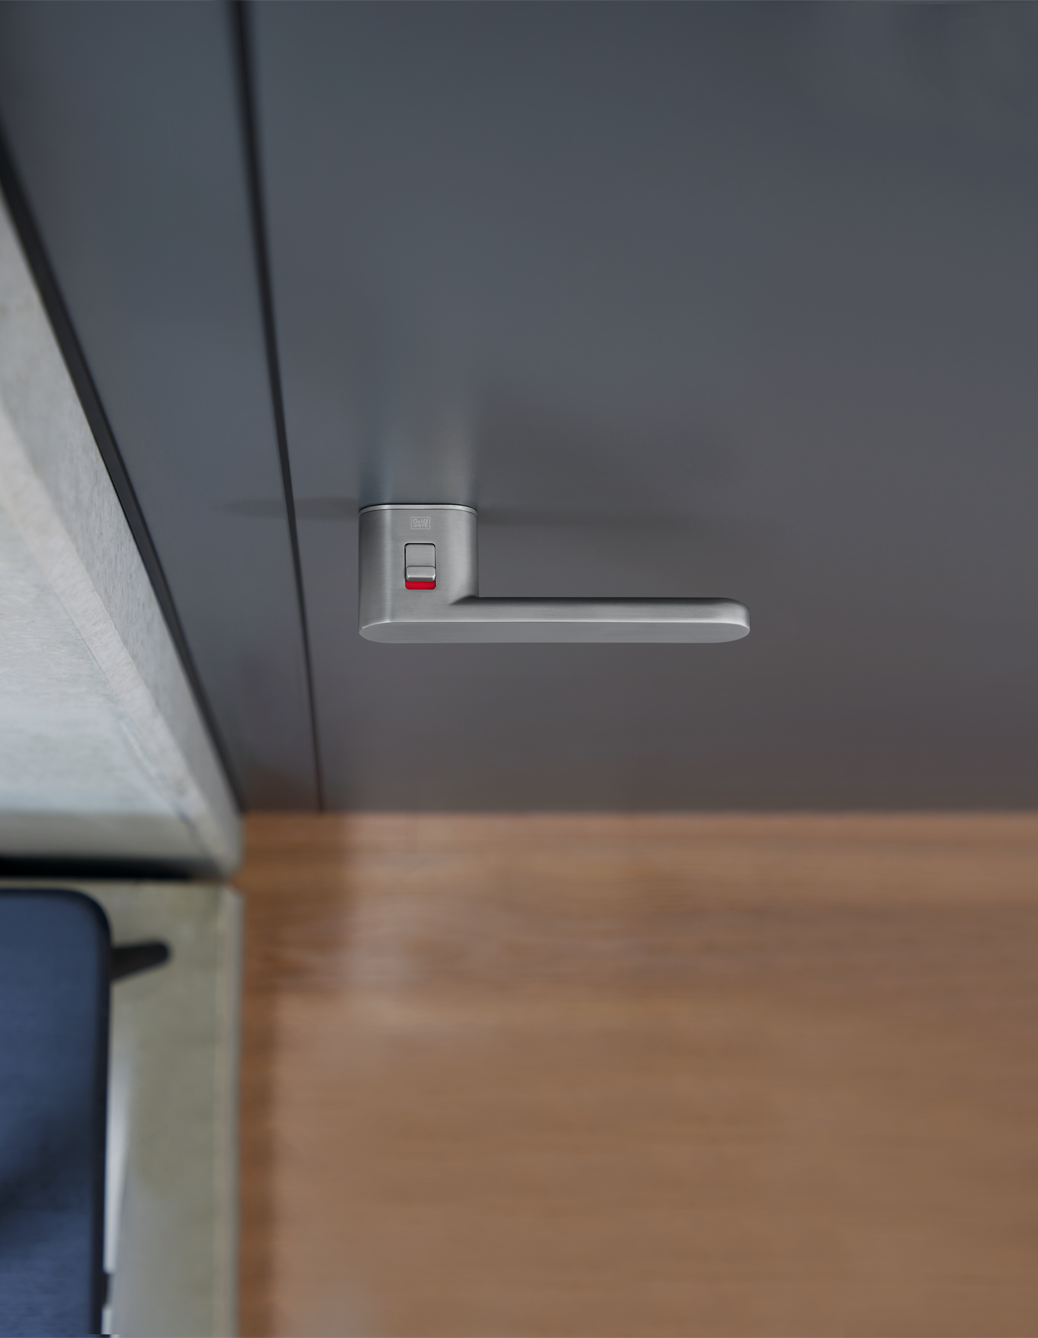 The illustration shows the Griffwerk smart2lock Avus One door handle from above with the latch closed.